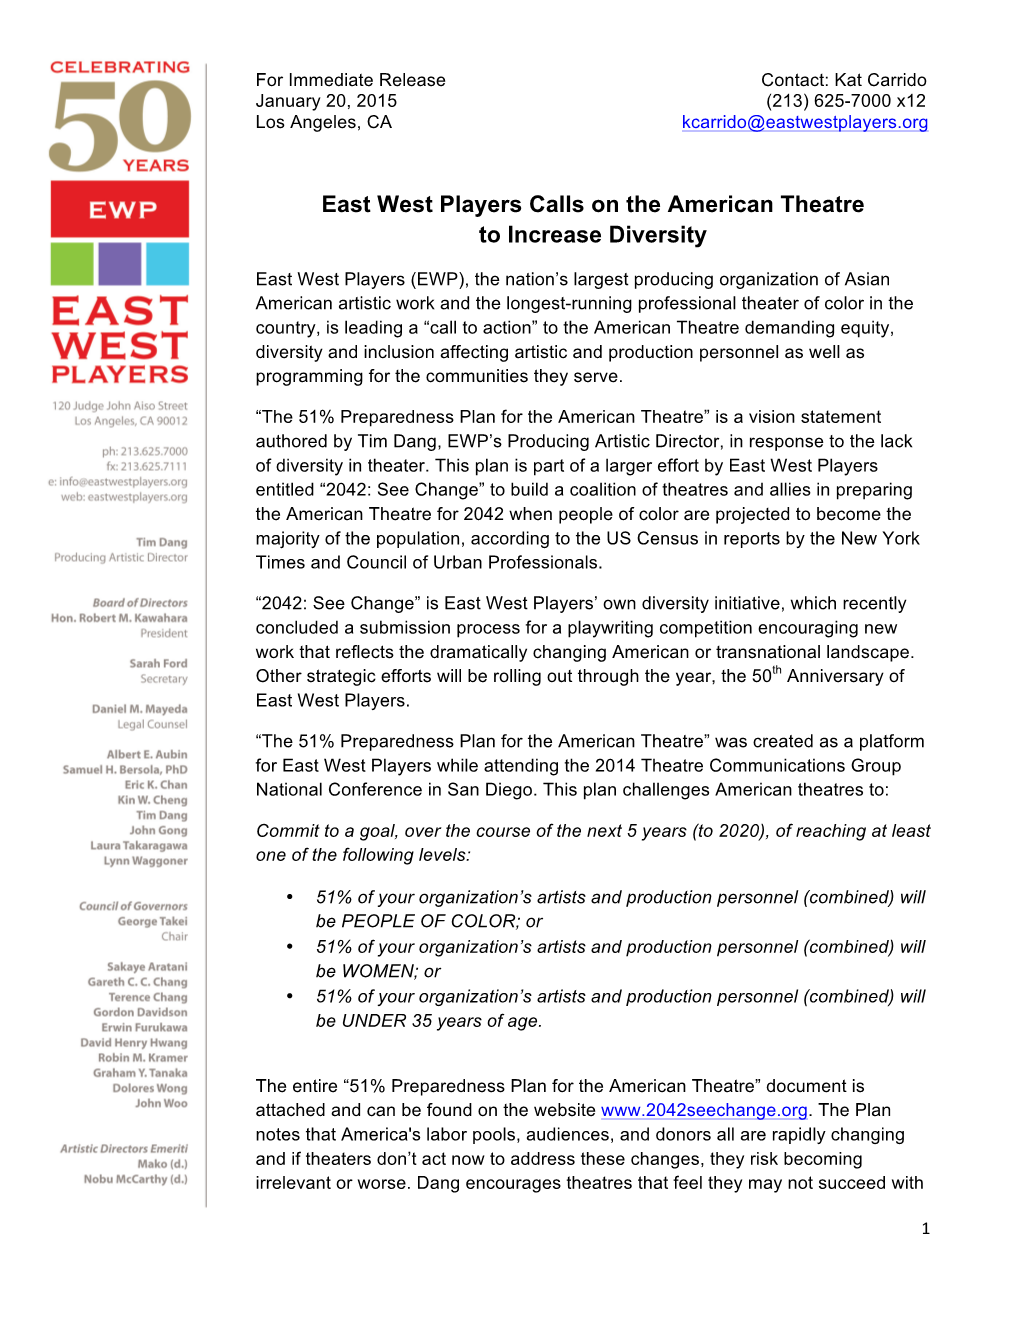 East West Players Calls on the American Theatre to Increase Diversity